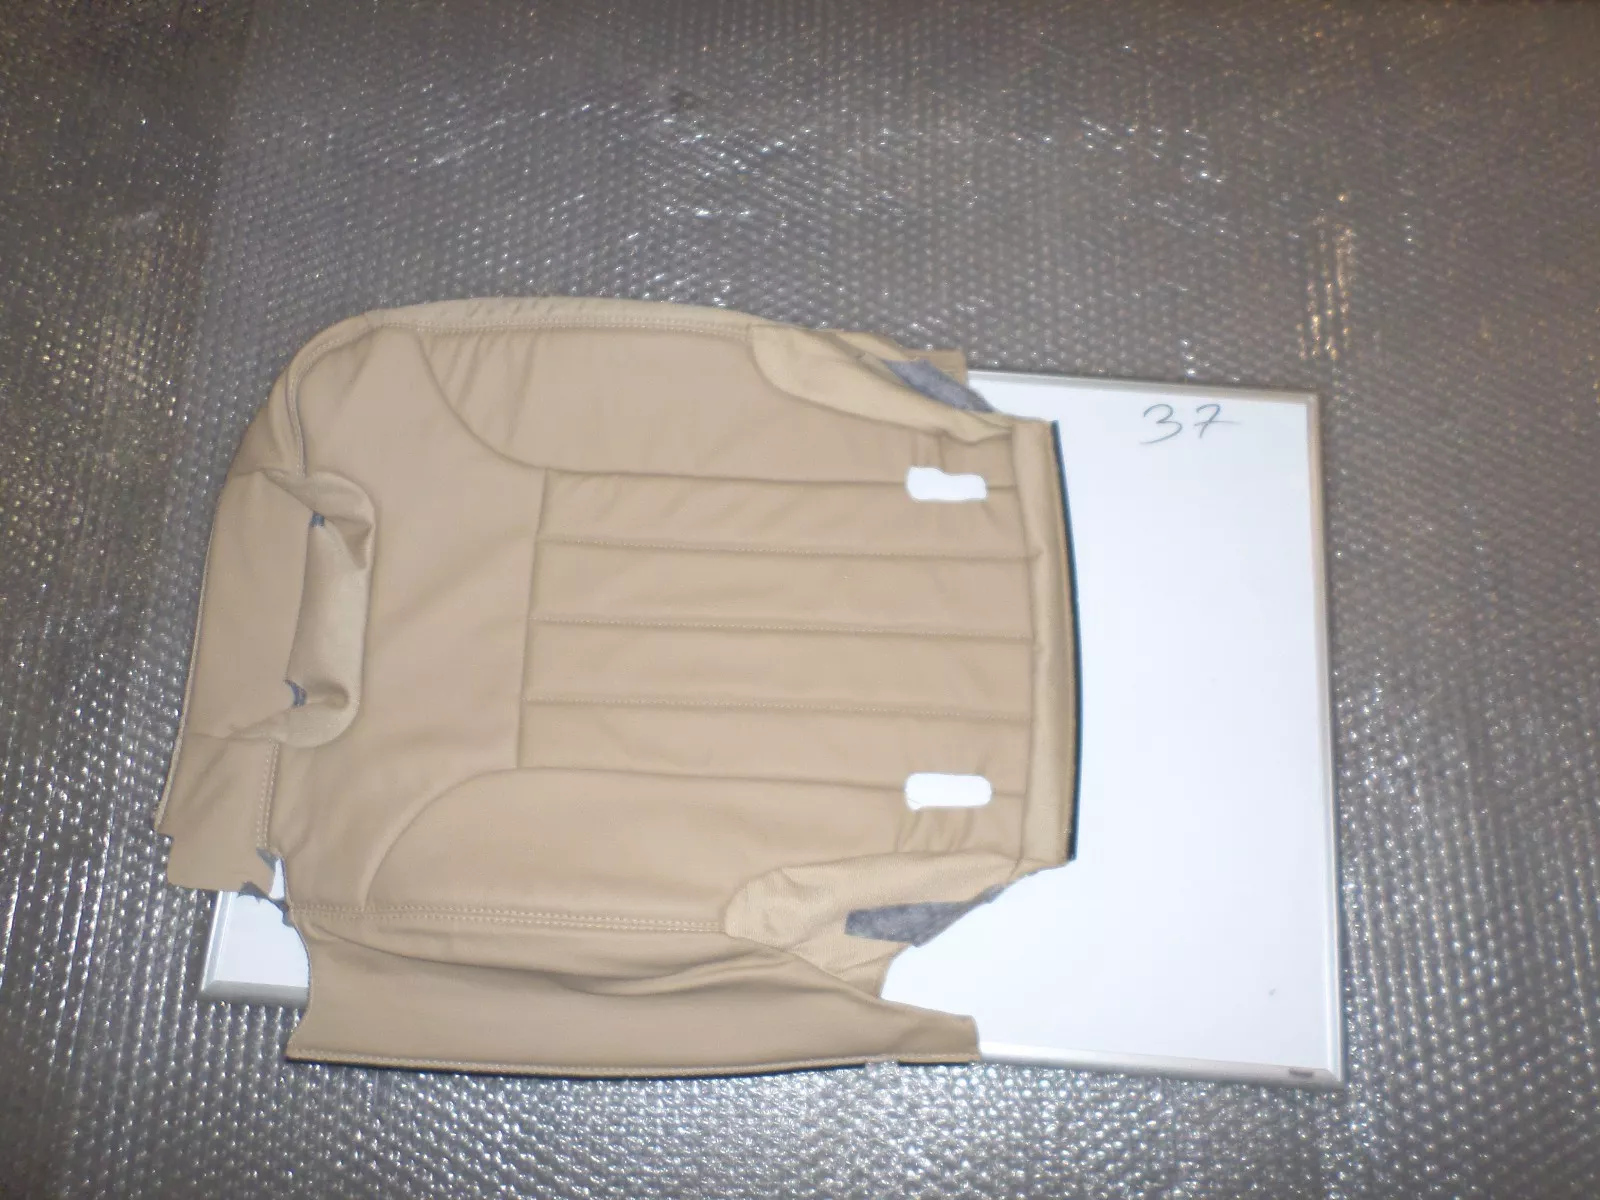 New OEM Mercedes 3rd Row LH Seat Cover 2006-2013 R-Class 251-930-08-87-8K55 - $99.00